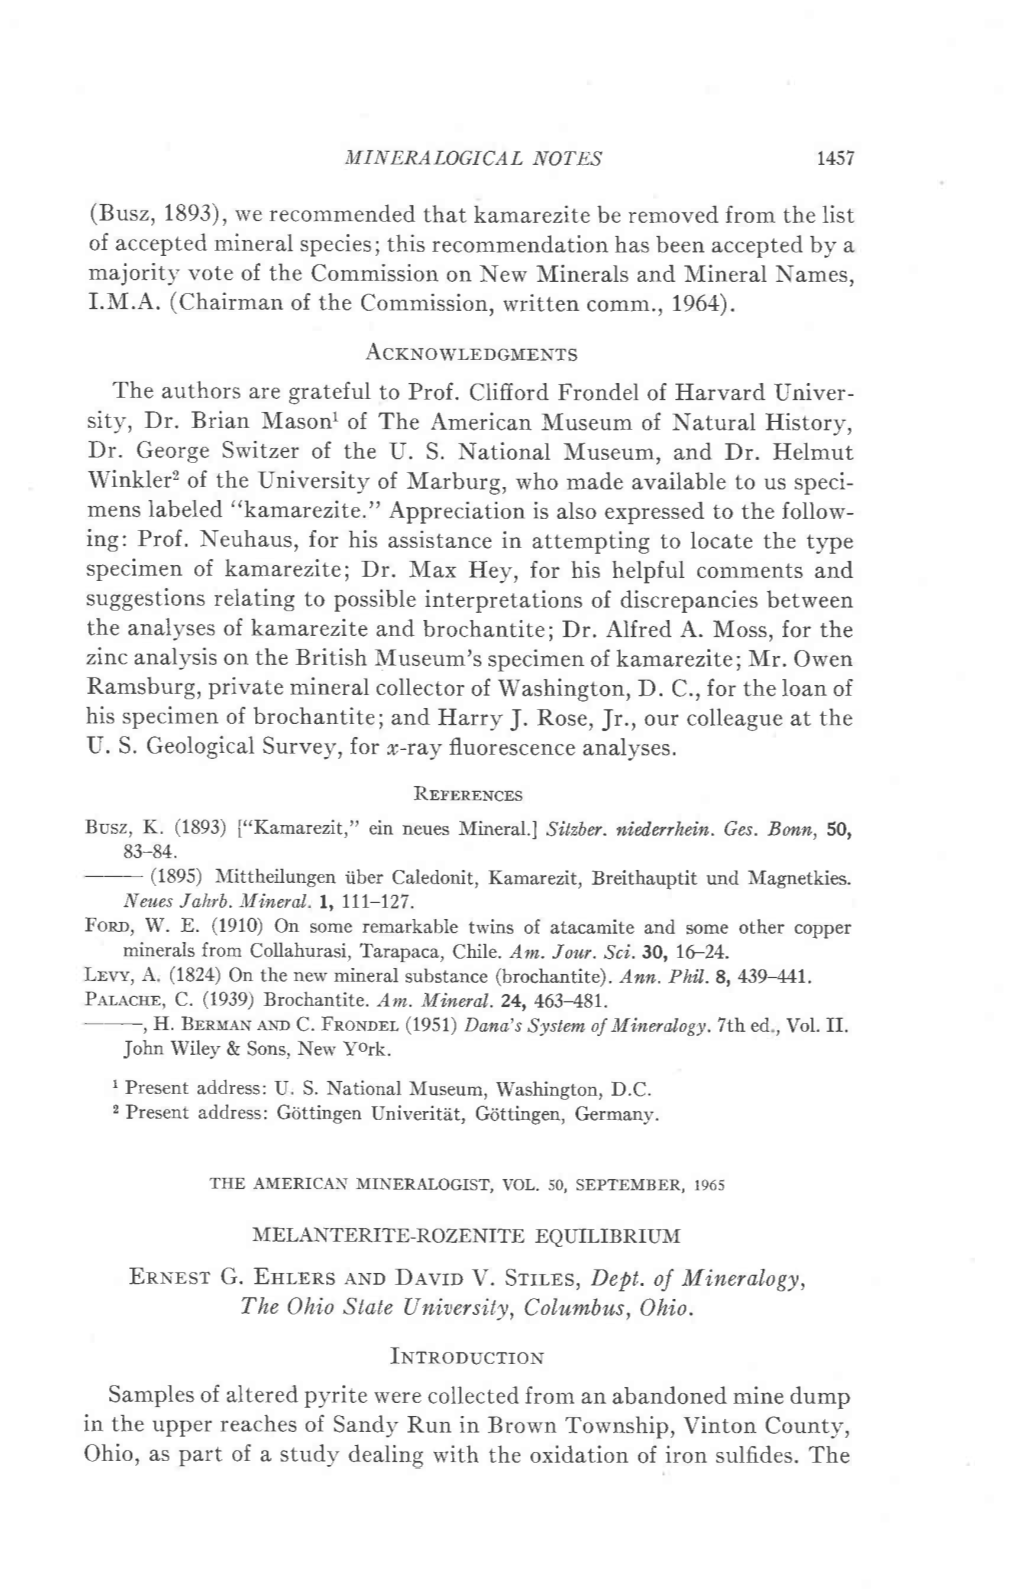 (Busz, 1893), We Recommended That Kamarezite Be Removed from the List